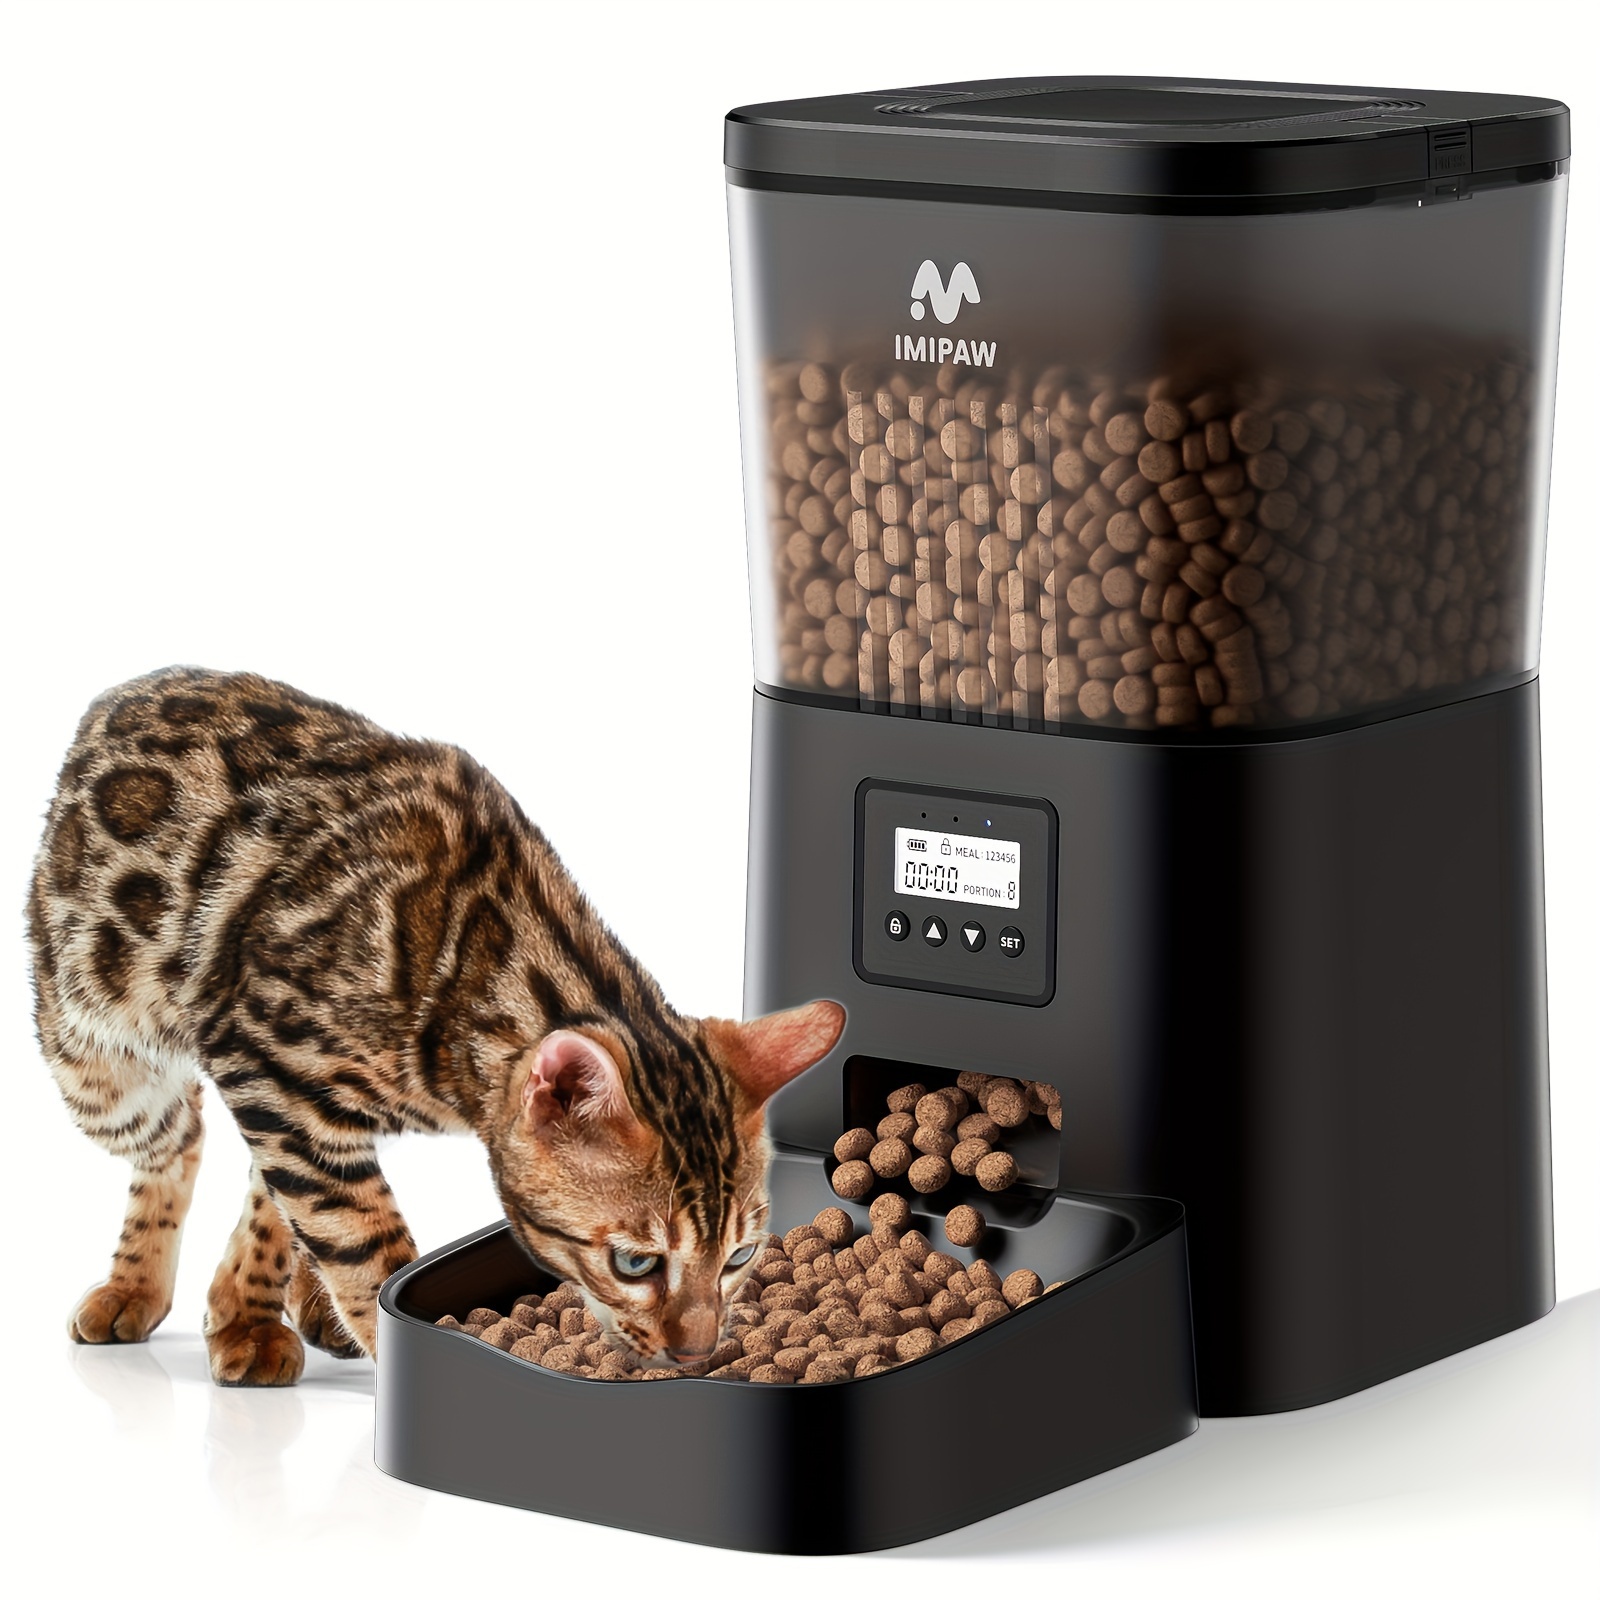 

Imipaw 4l Automatic Pet Feeder - Timed & Portion-controlled Cat And Dog Food Dispenser With Long-lasting Battery, Usb Compatible Portable Pet Feeder